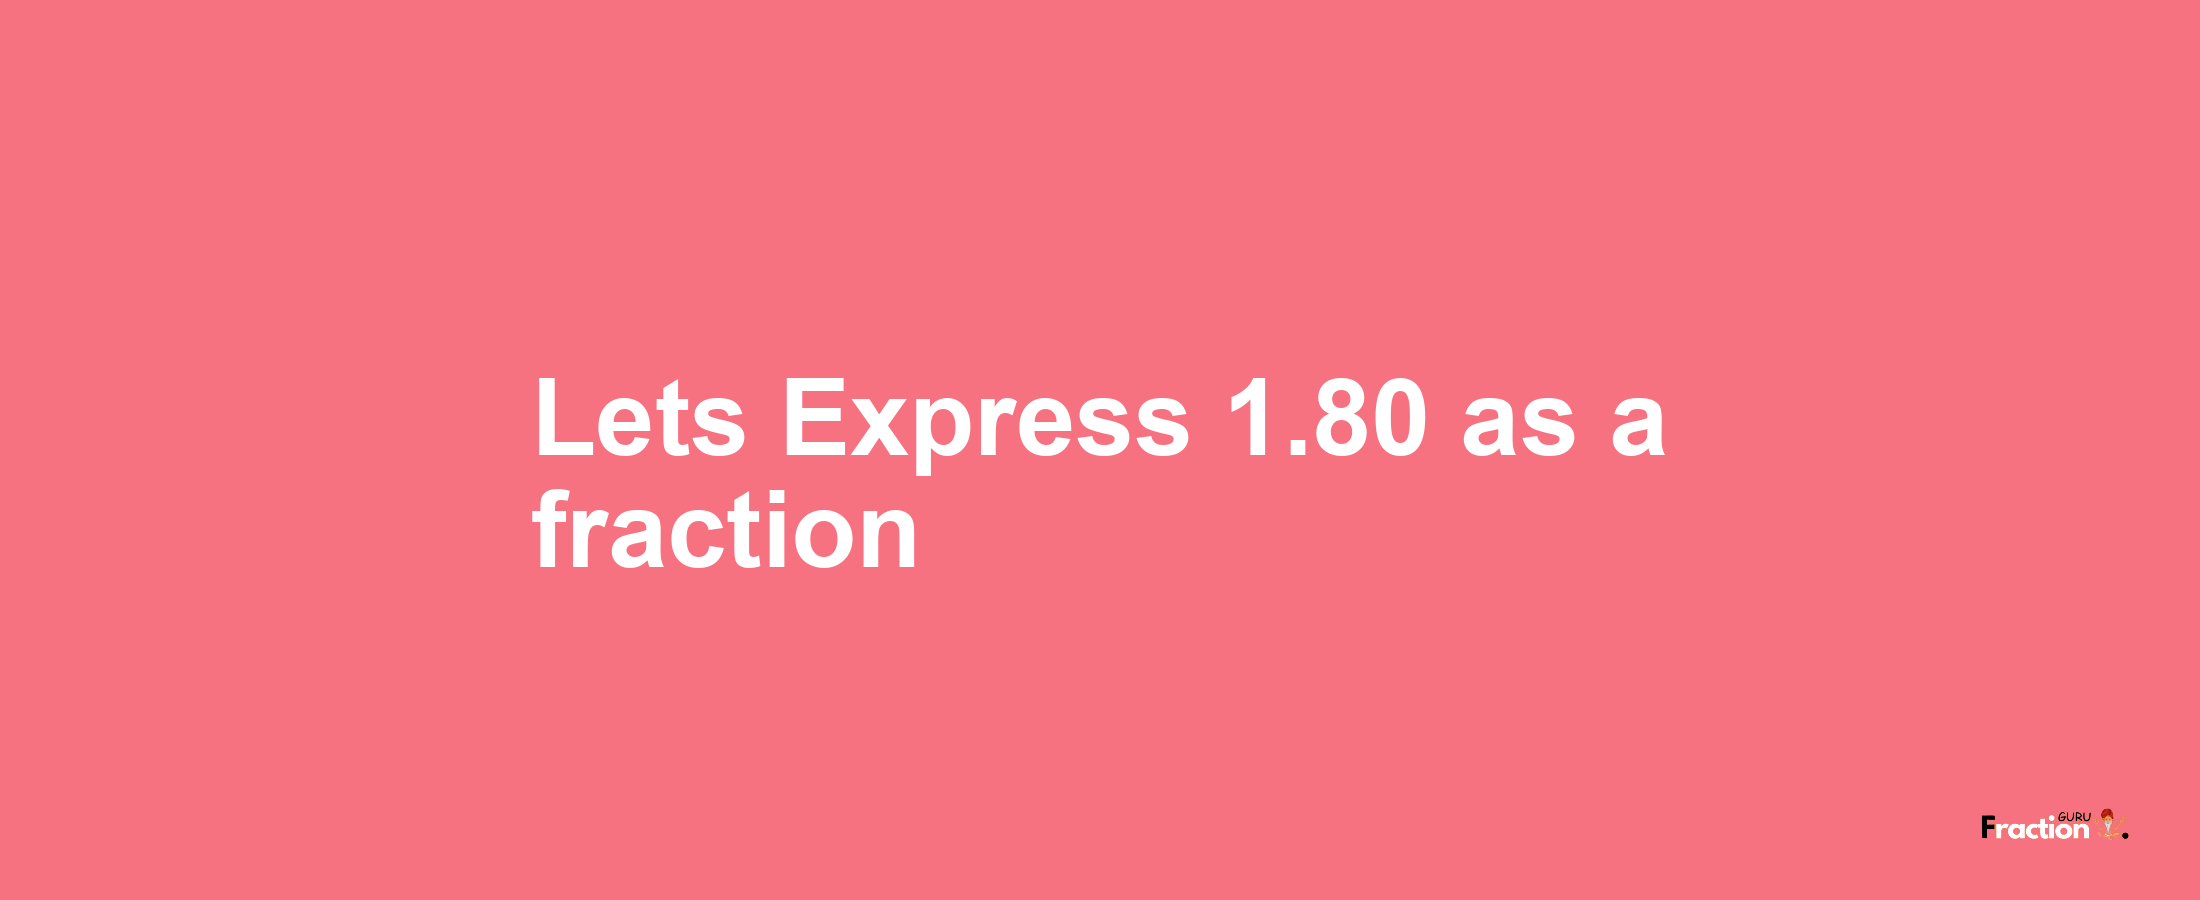 Lets Express 1.80 as afraction